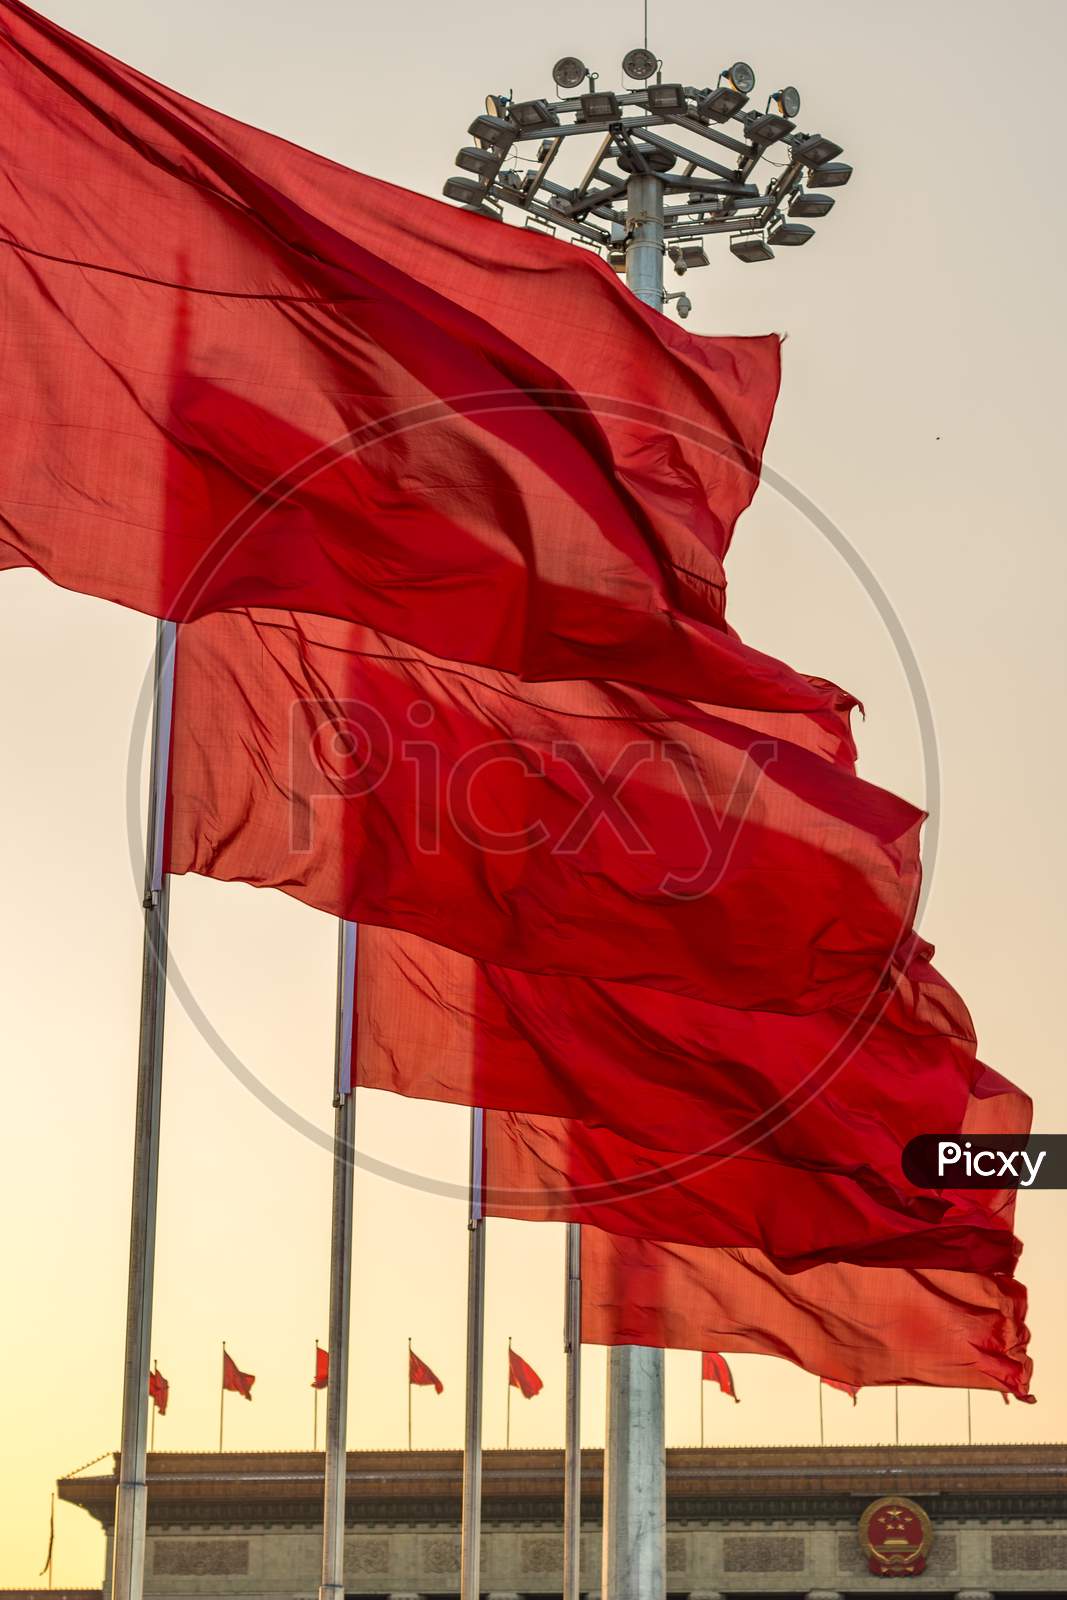 Red Banners Unfurled In The Wind At Tienanmen Square In Beijing, China